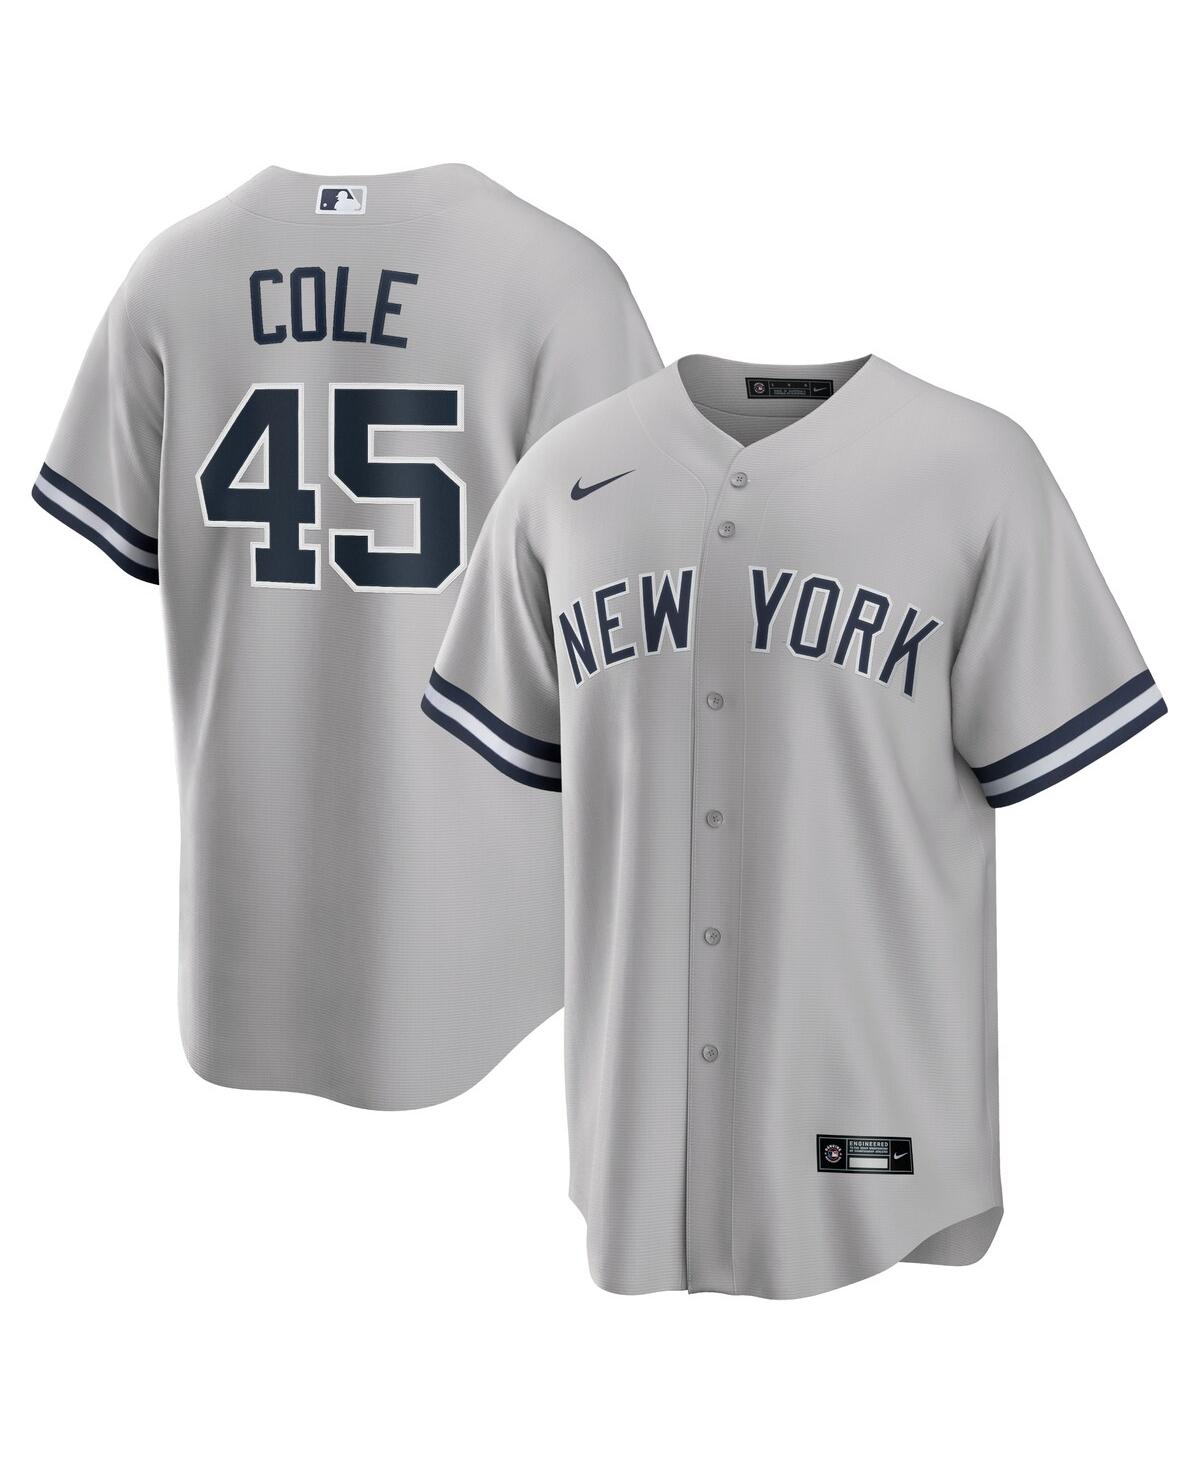 Nike Men's Chicago White Sox Official Blank Replica Jersey - Macy's